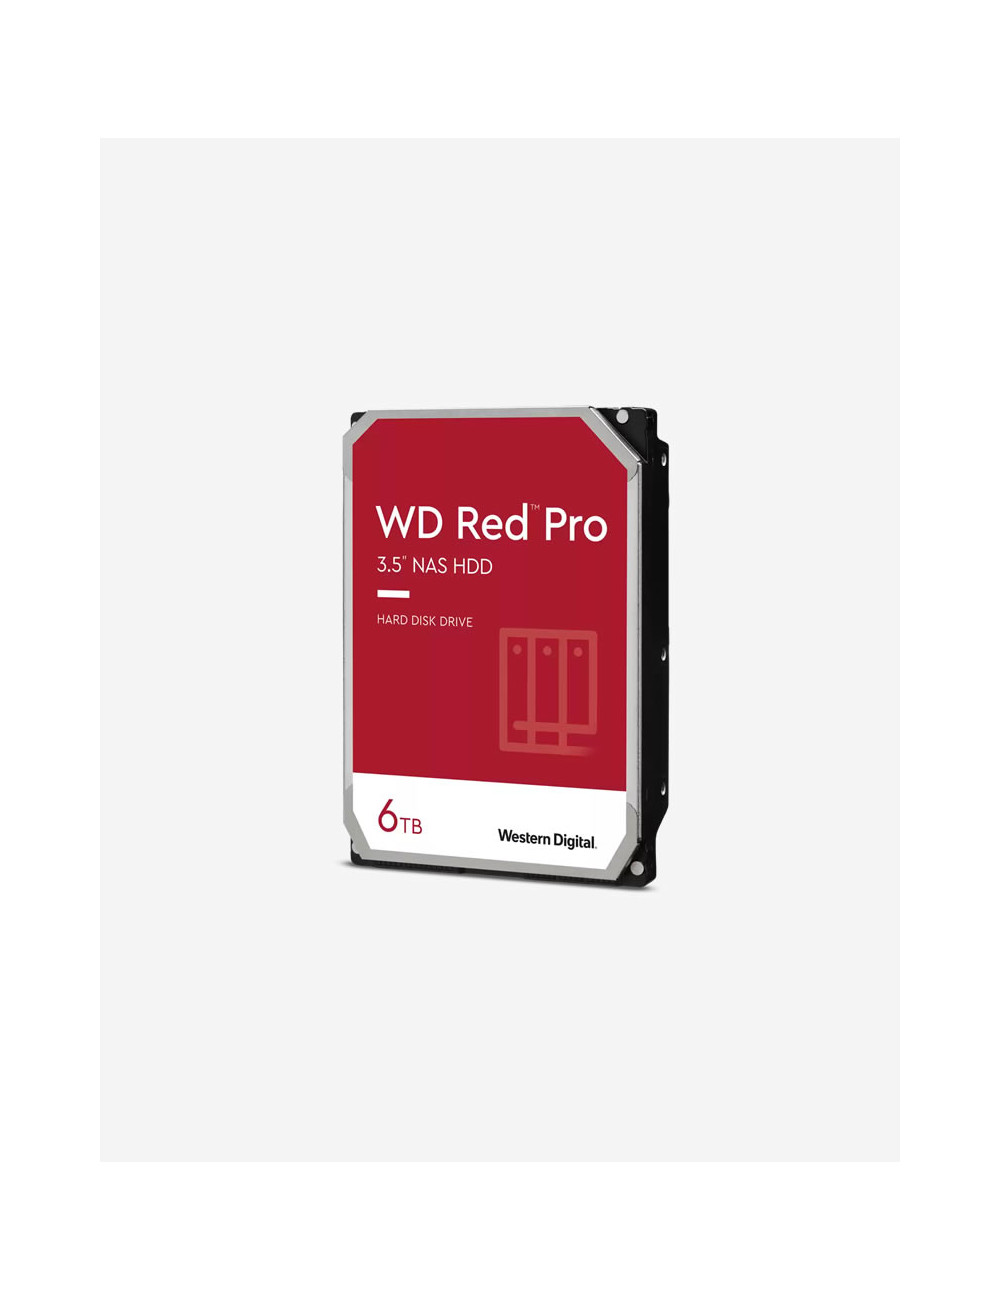 WD RED PRO 6TB 3.5" HDD Drive